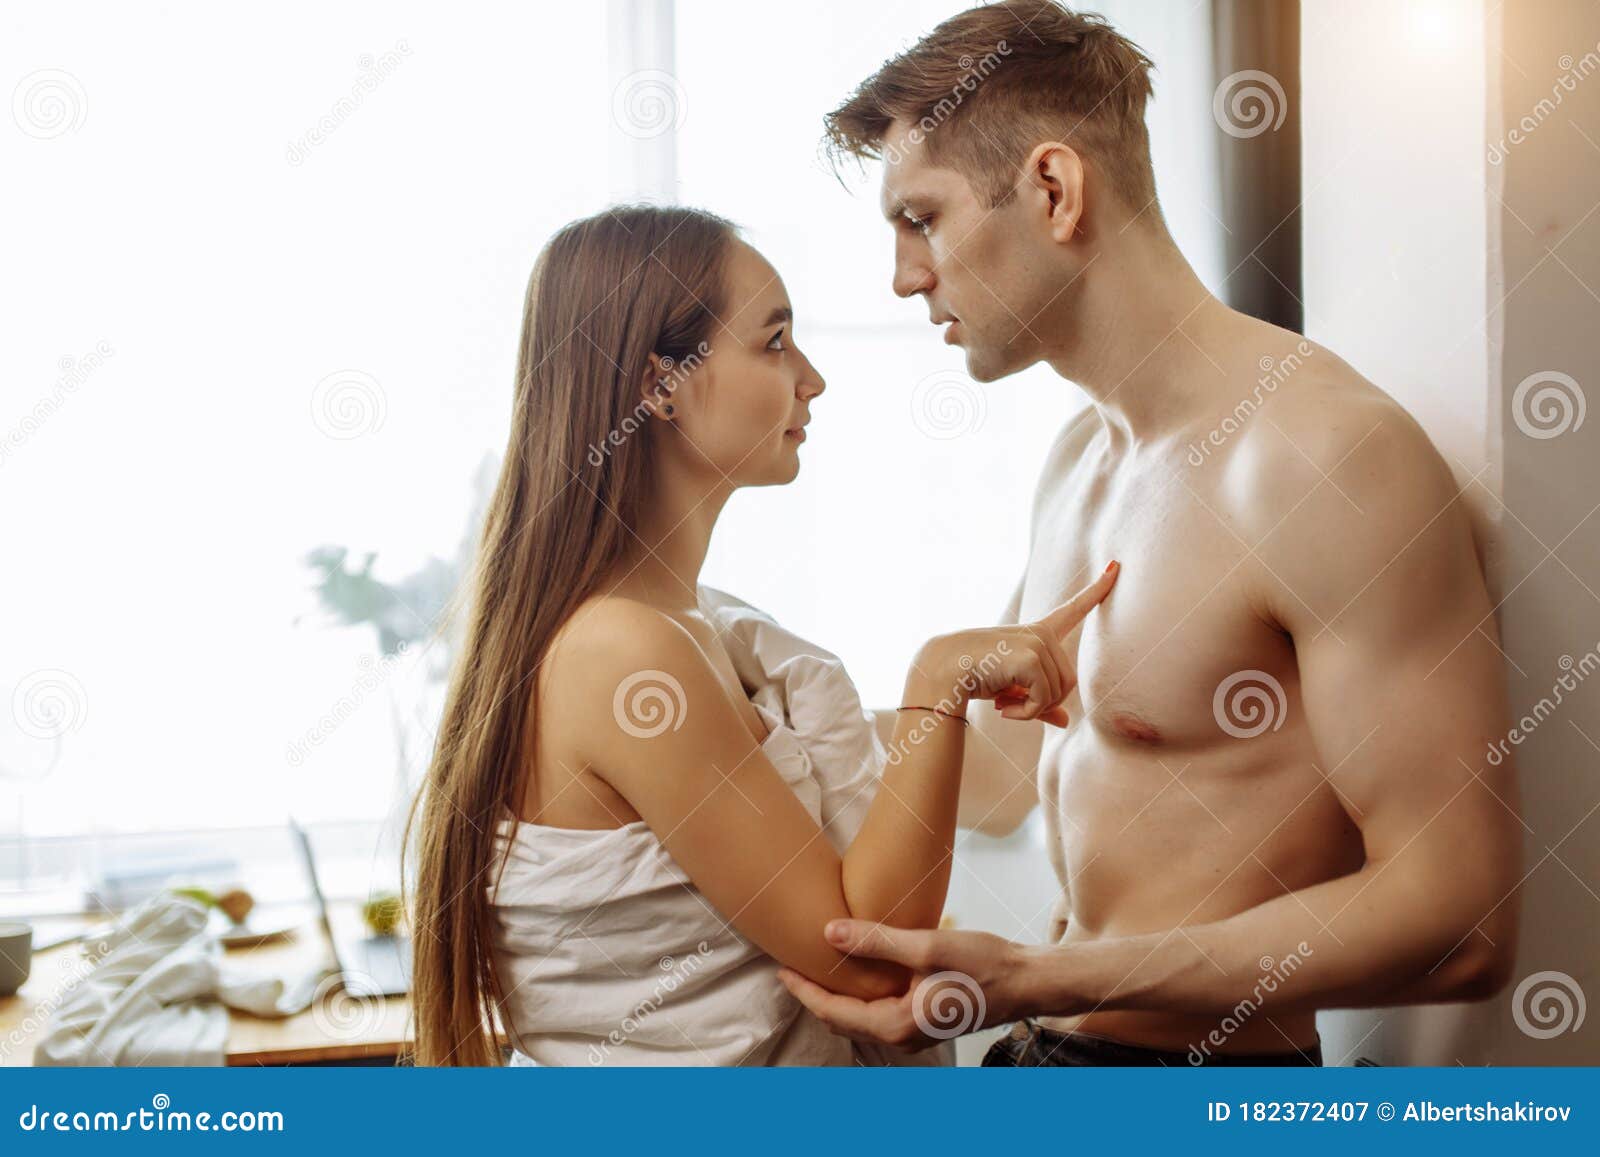 Woman Hints at Sex with Her Boyfriend at Home Stock Image